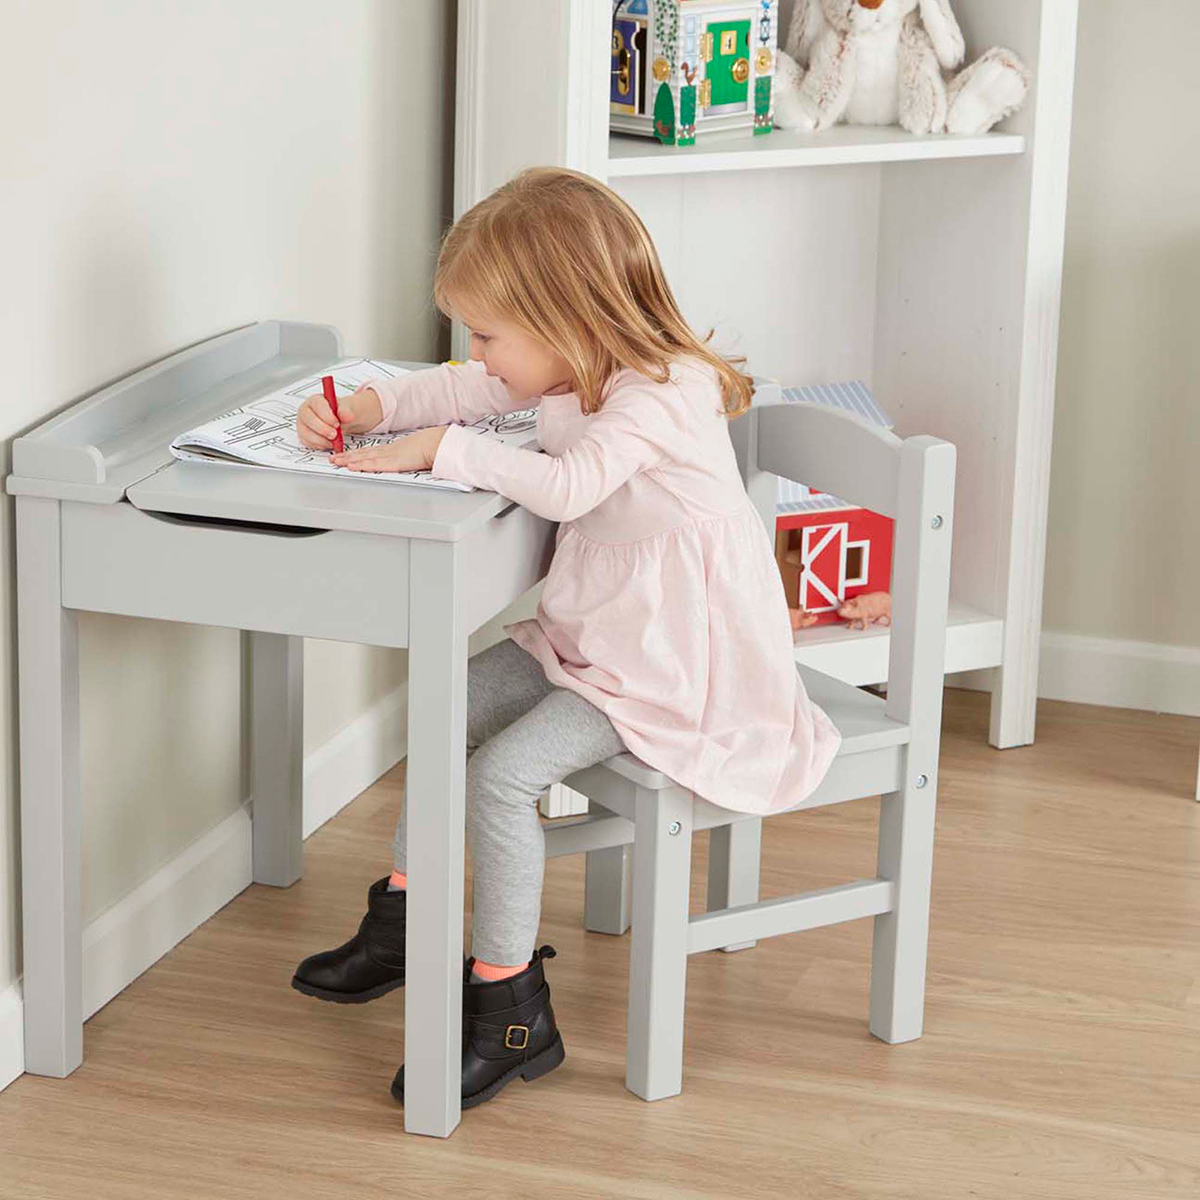 Melissa & Doug(R) Wooden Lift-Top Desk And Chair